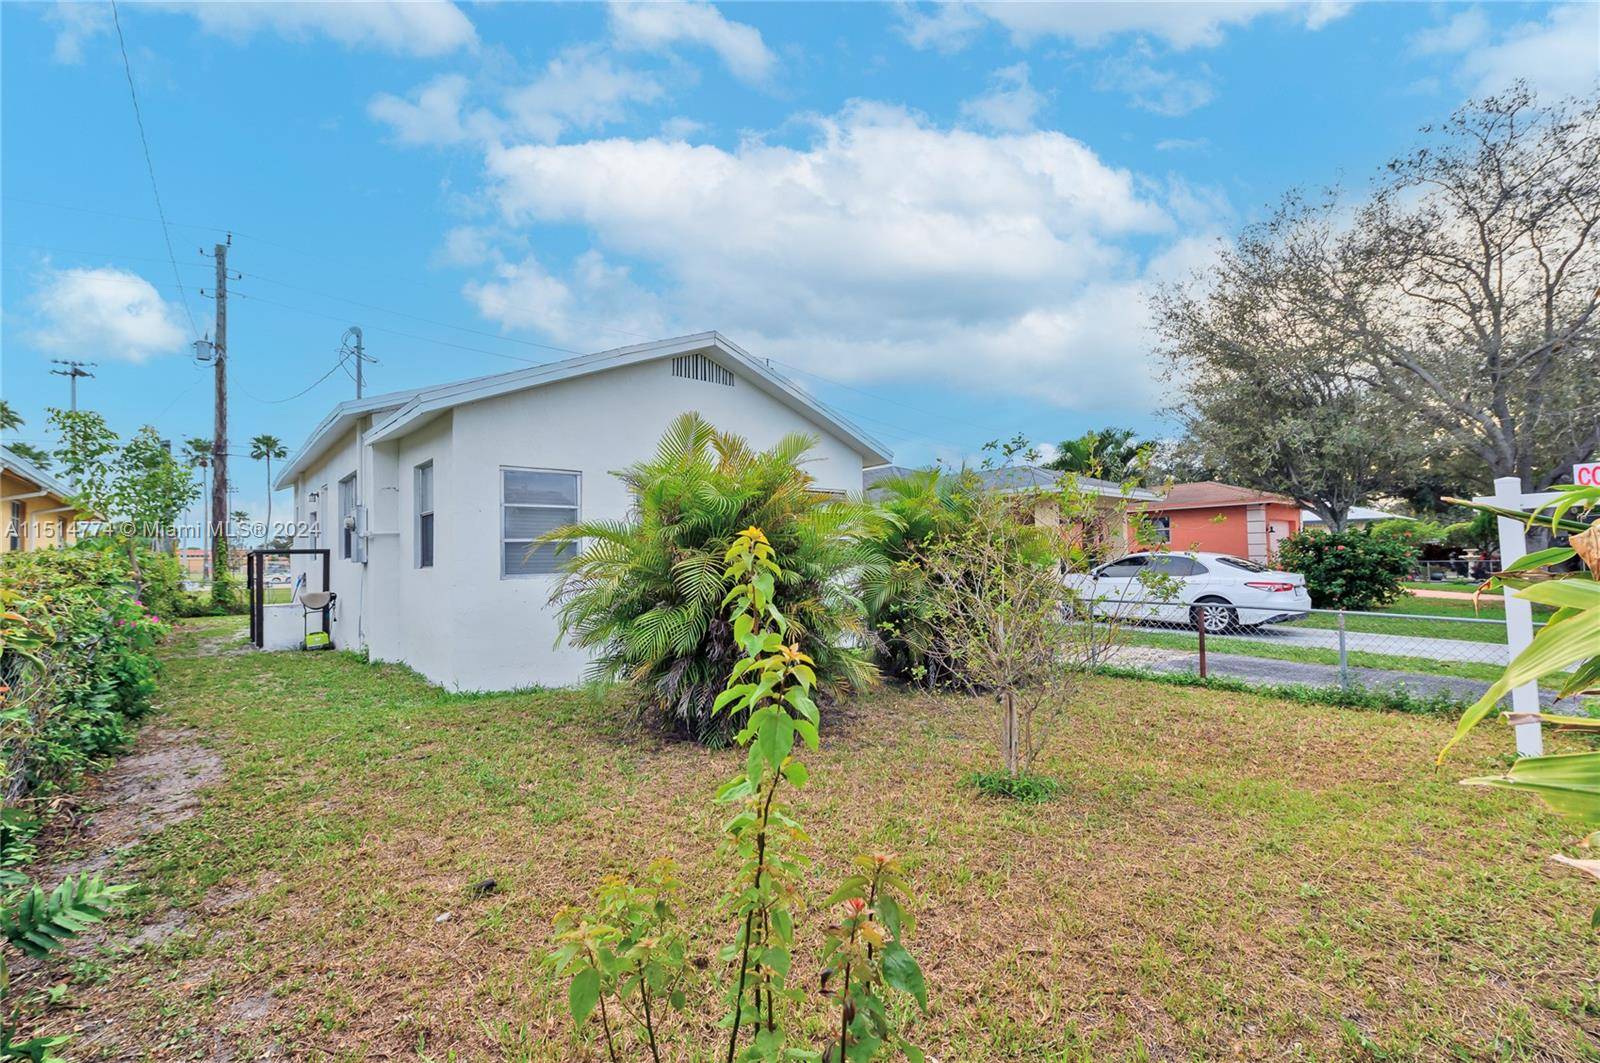 Welcome to this single family home, conveniently located nearby FLL international airport, the Seminole Hard Rock Casino Guitar Hotel, Hollywood Beach minutes away from the FL turnpike Interstate 595.